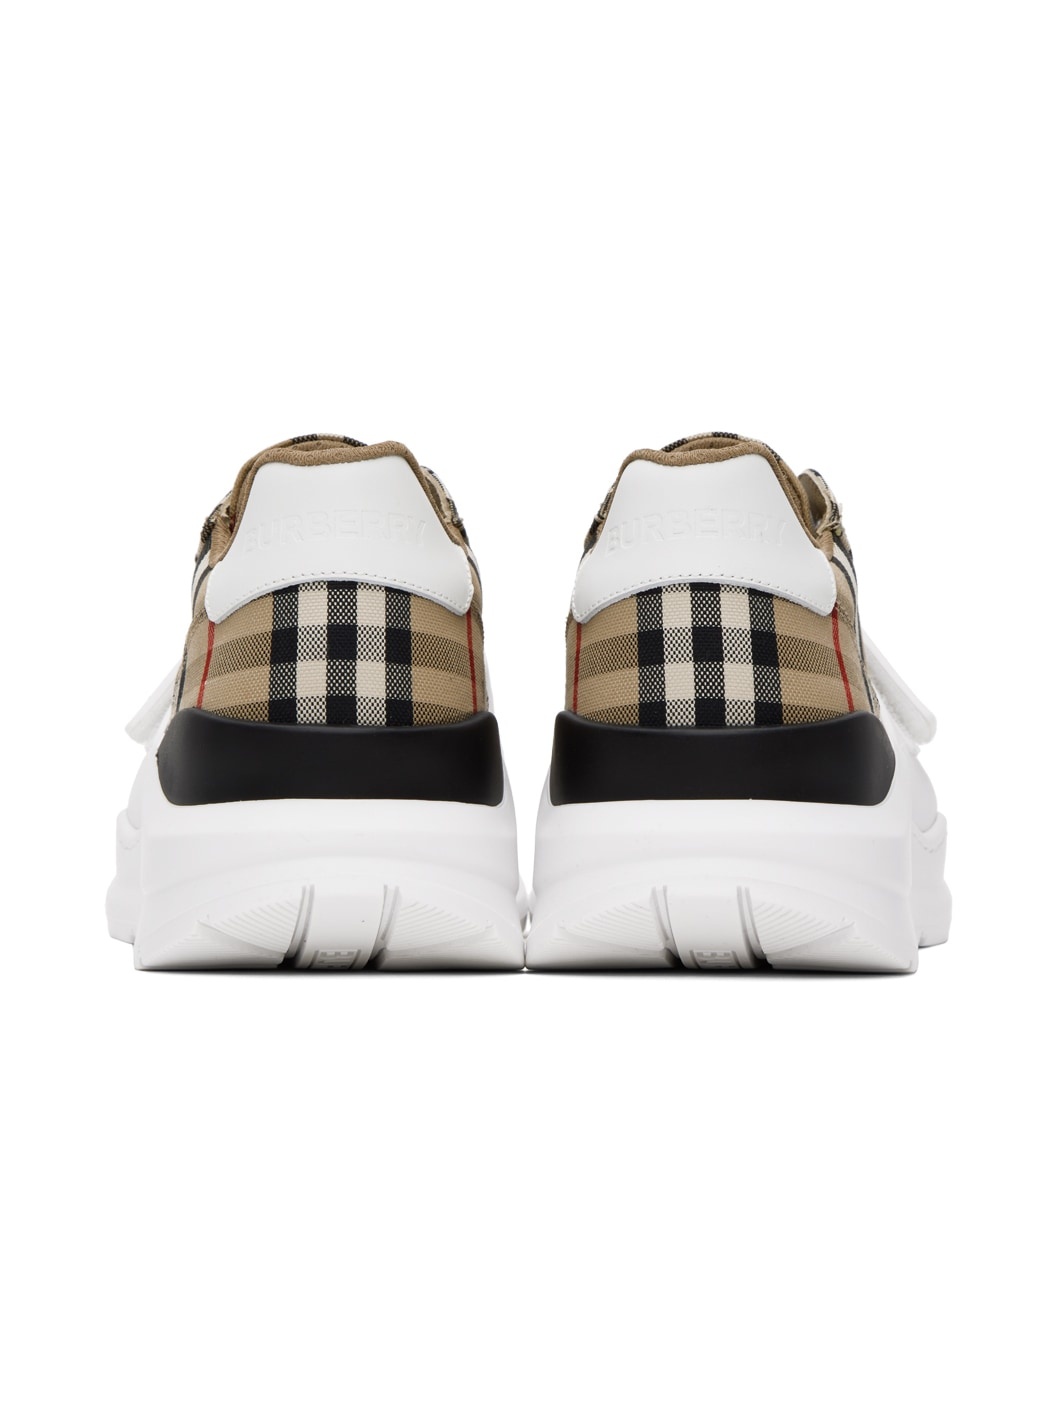 Beige & White Check Sneakers - 2